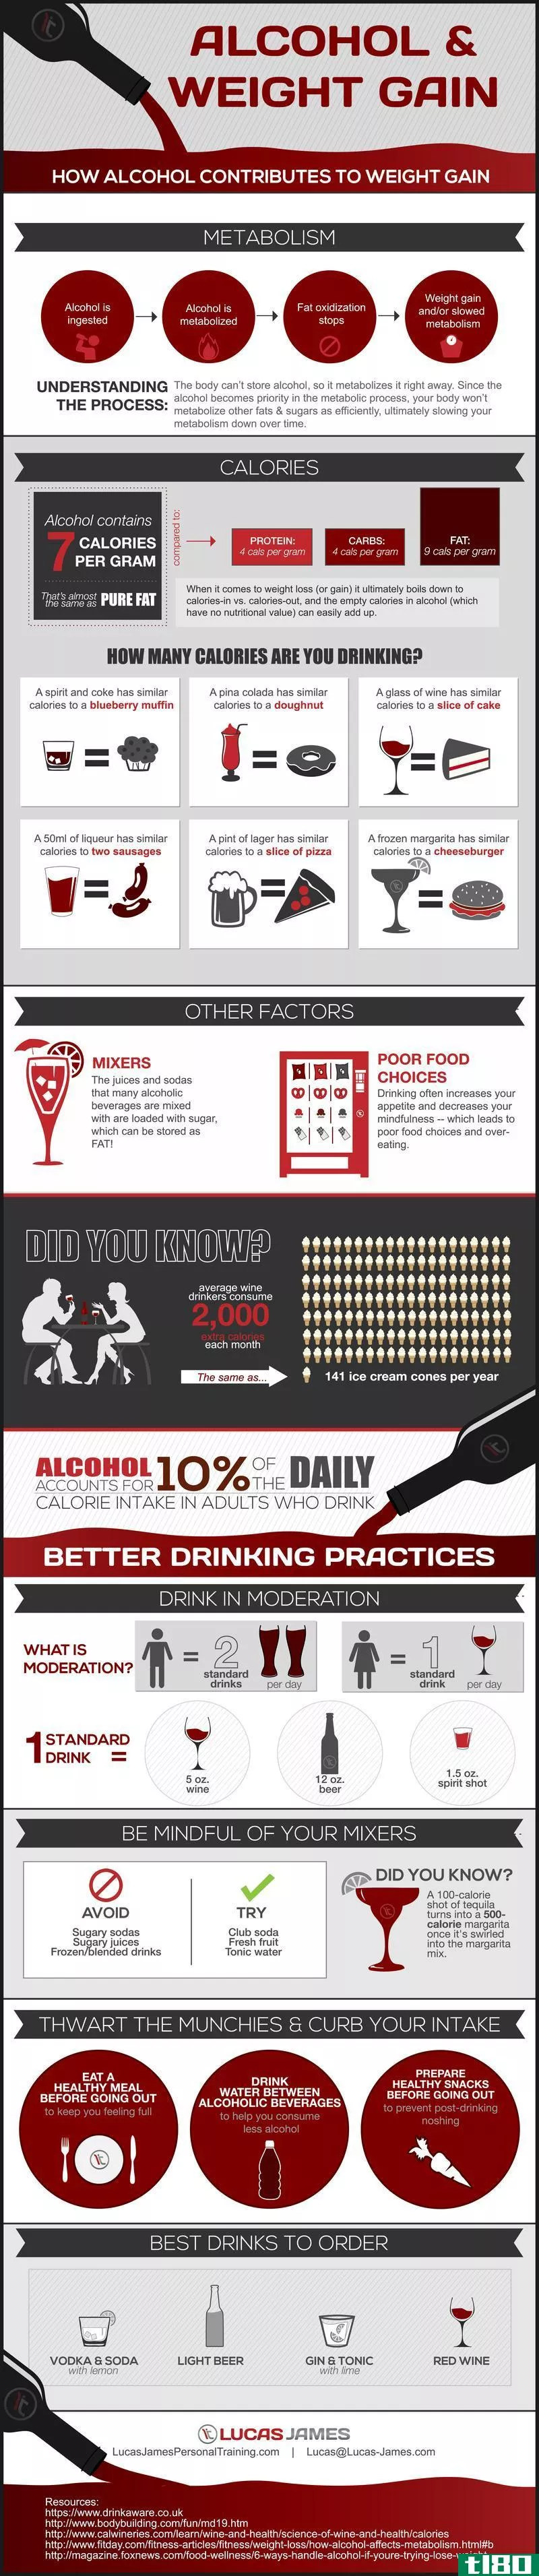 Illustration for article titled This Infographic Shows How Alcohol Contributes to Weight Gain